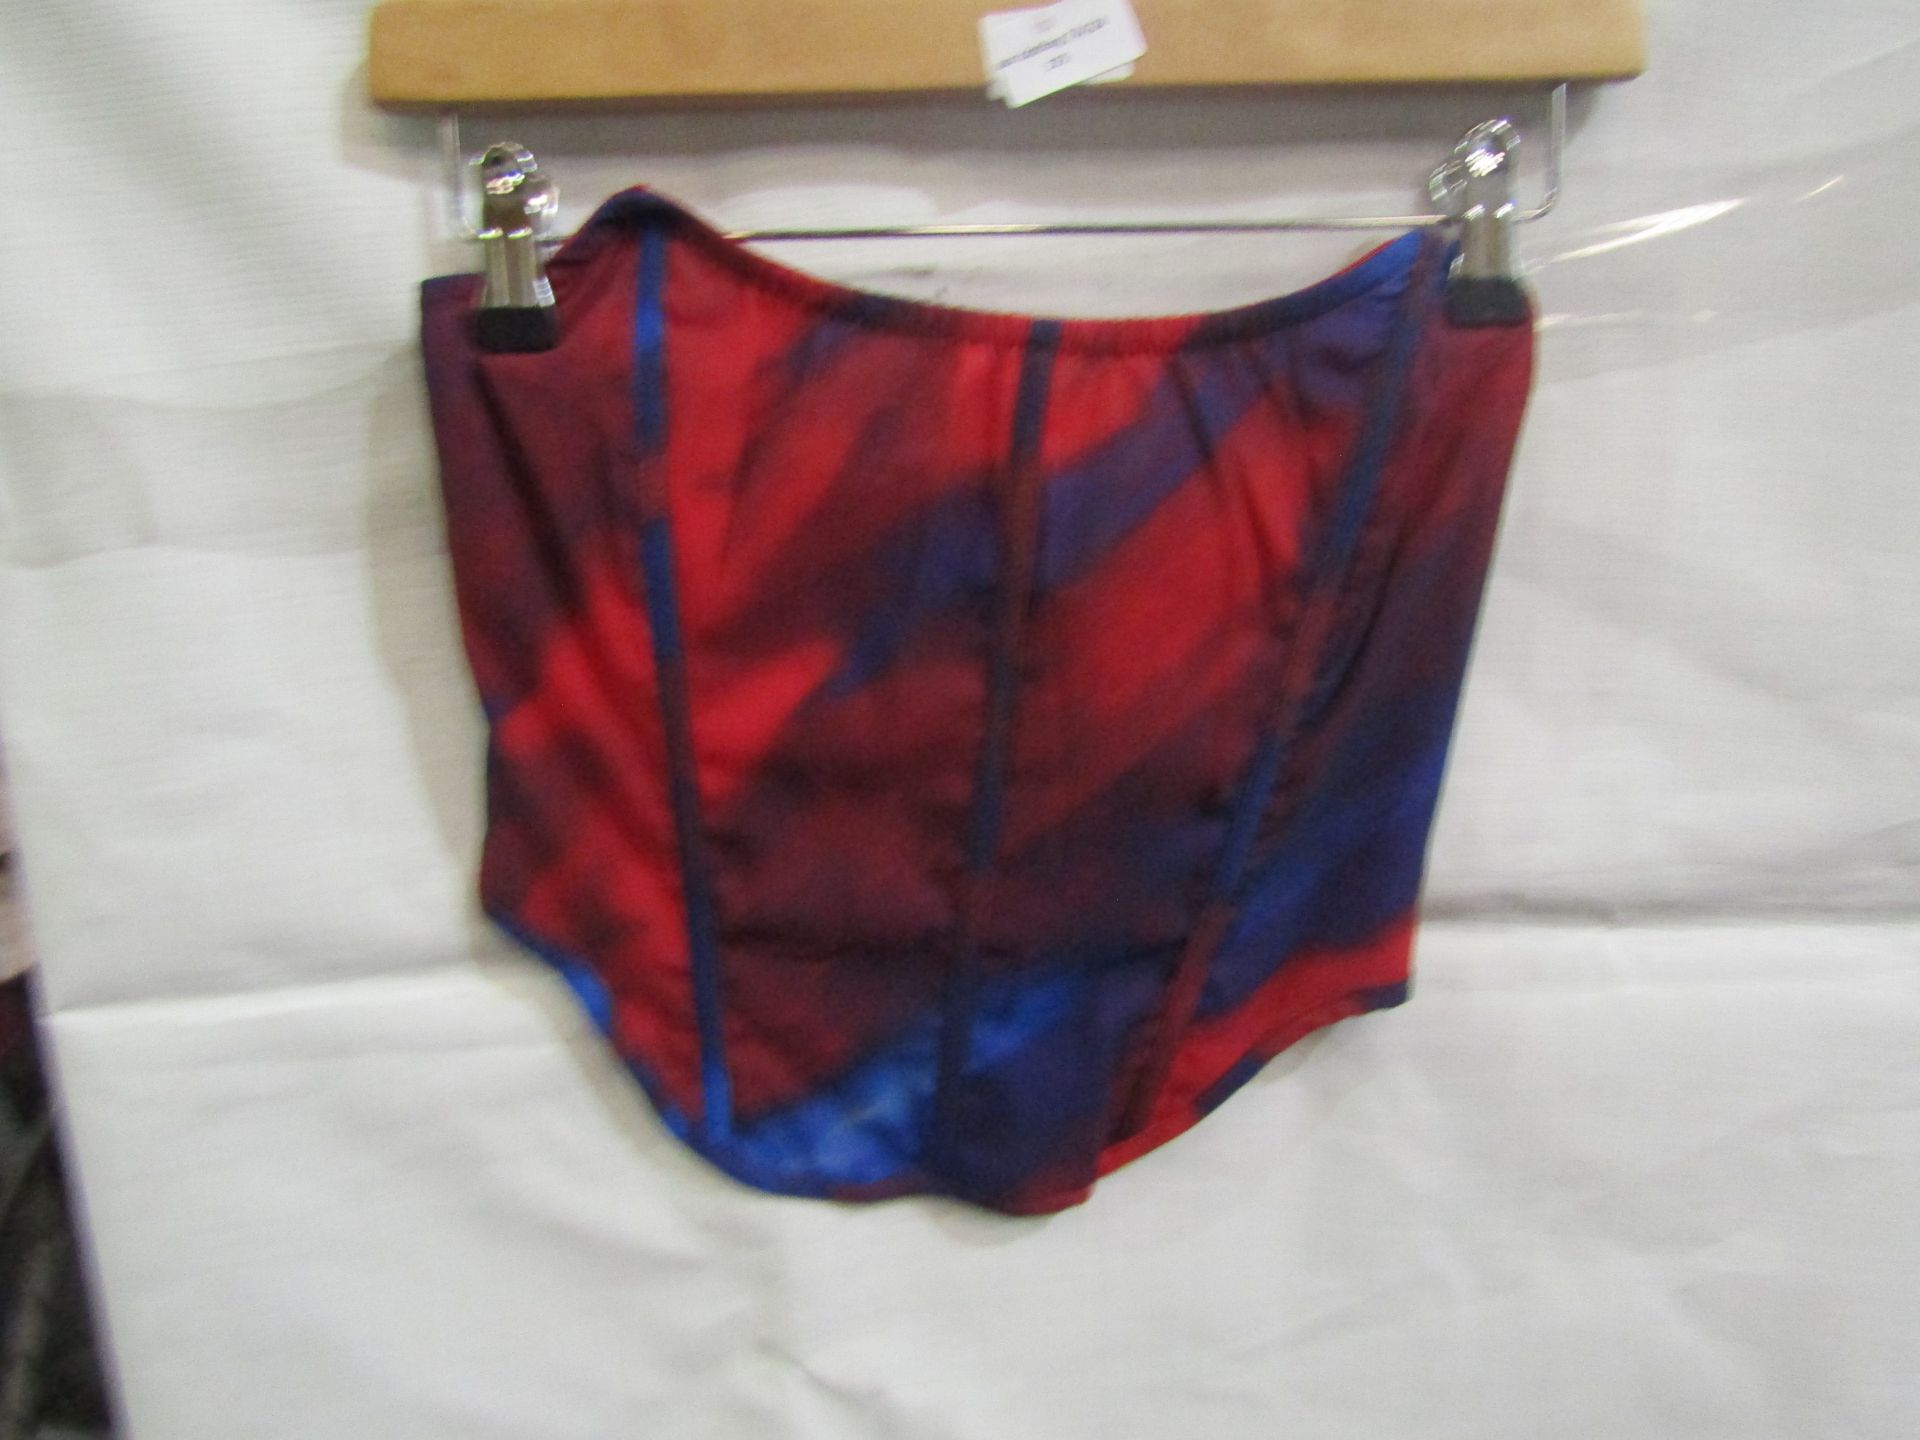 2x Pretty Little Thing Red Abstract Print Chiffon Structured Bandeau Corset - Size 12, New With